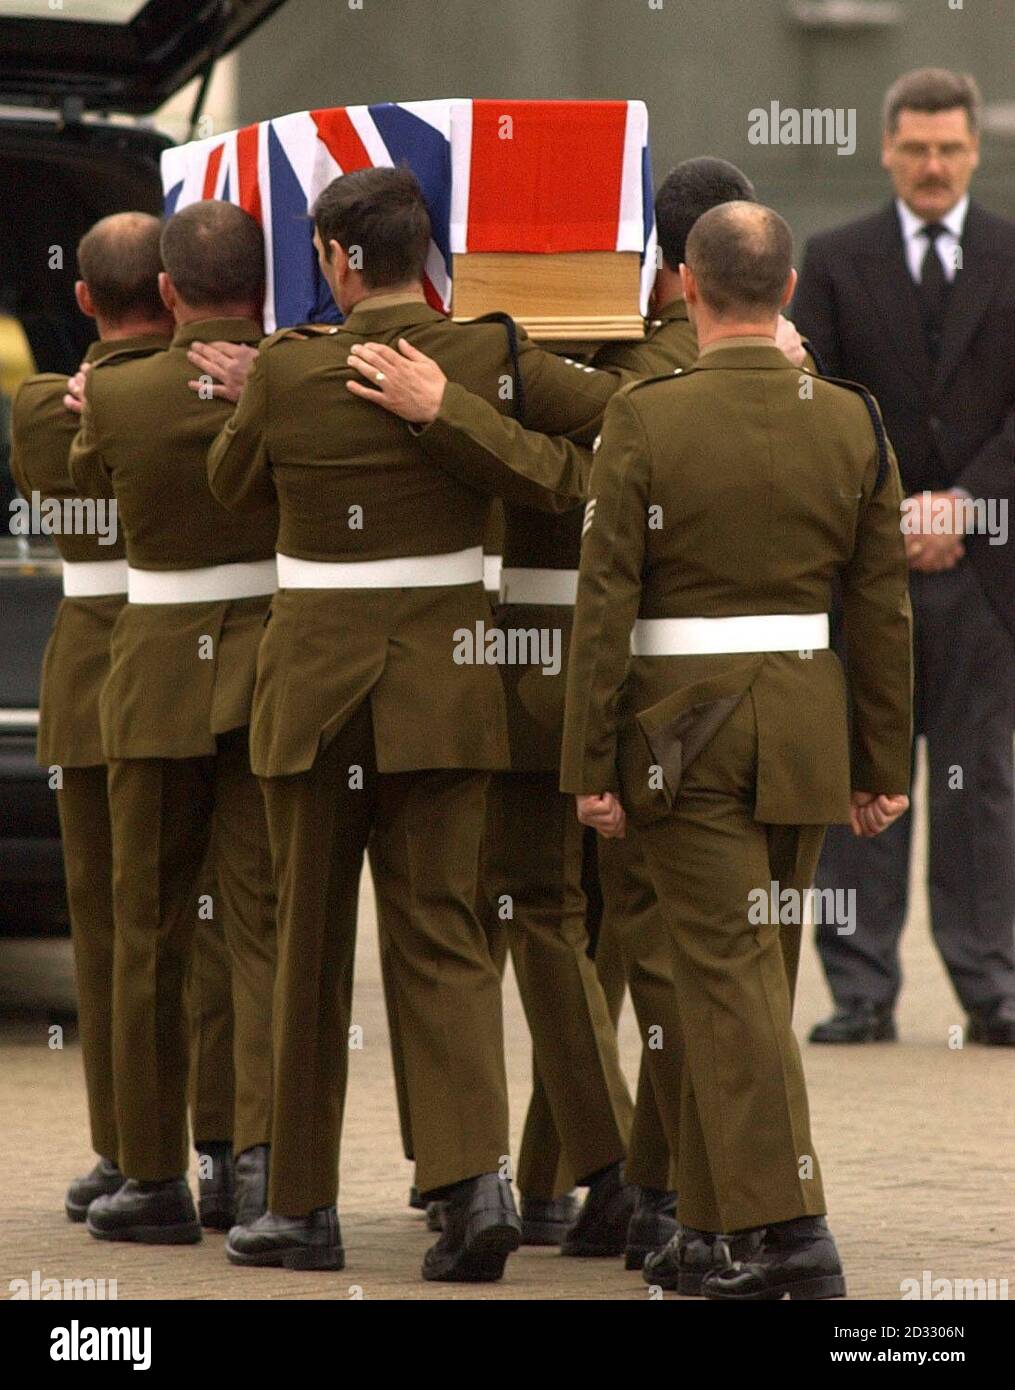 The coffin of Staff Sergeant Simon Cullingworth, 36, is carried from an RAF Hercules aircraft at RAF Brize Norton near Oxford by members of 33 Engineer Regiment of the Royal Engineers.   * The remains of Staff Sgt Cullingworth and Sapper Luke Allsopp were found in a shallow grave near Al Zubayr, outside Basra in southern Iraq. It is feared their Land Rover was ambushed and the men shot in cold blood after they went missing on March 23. Stock Photo